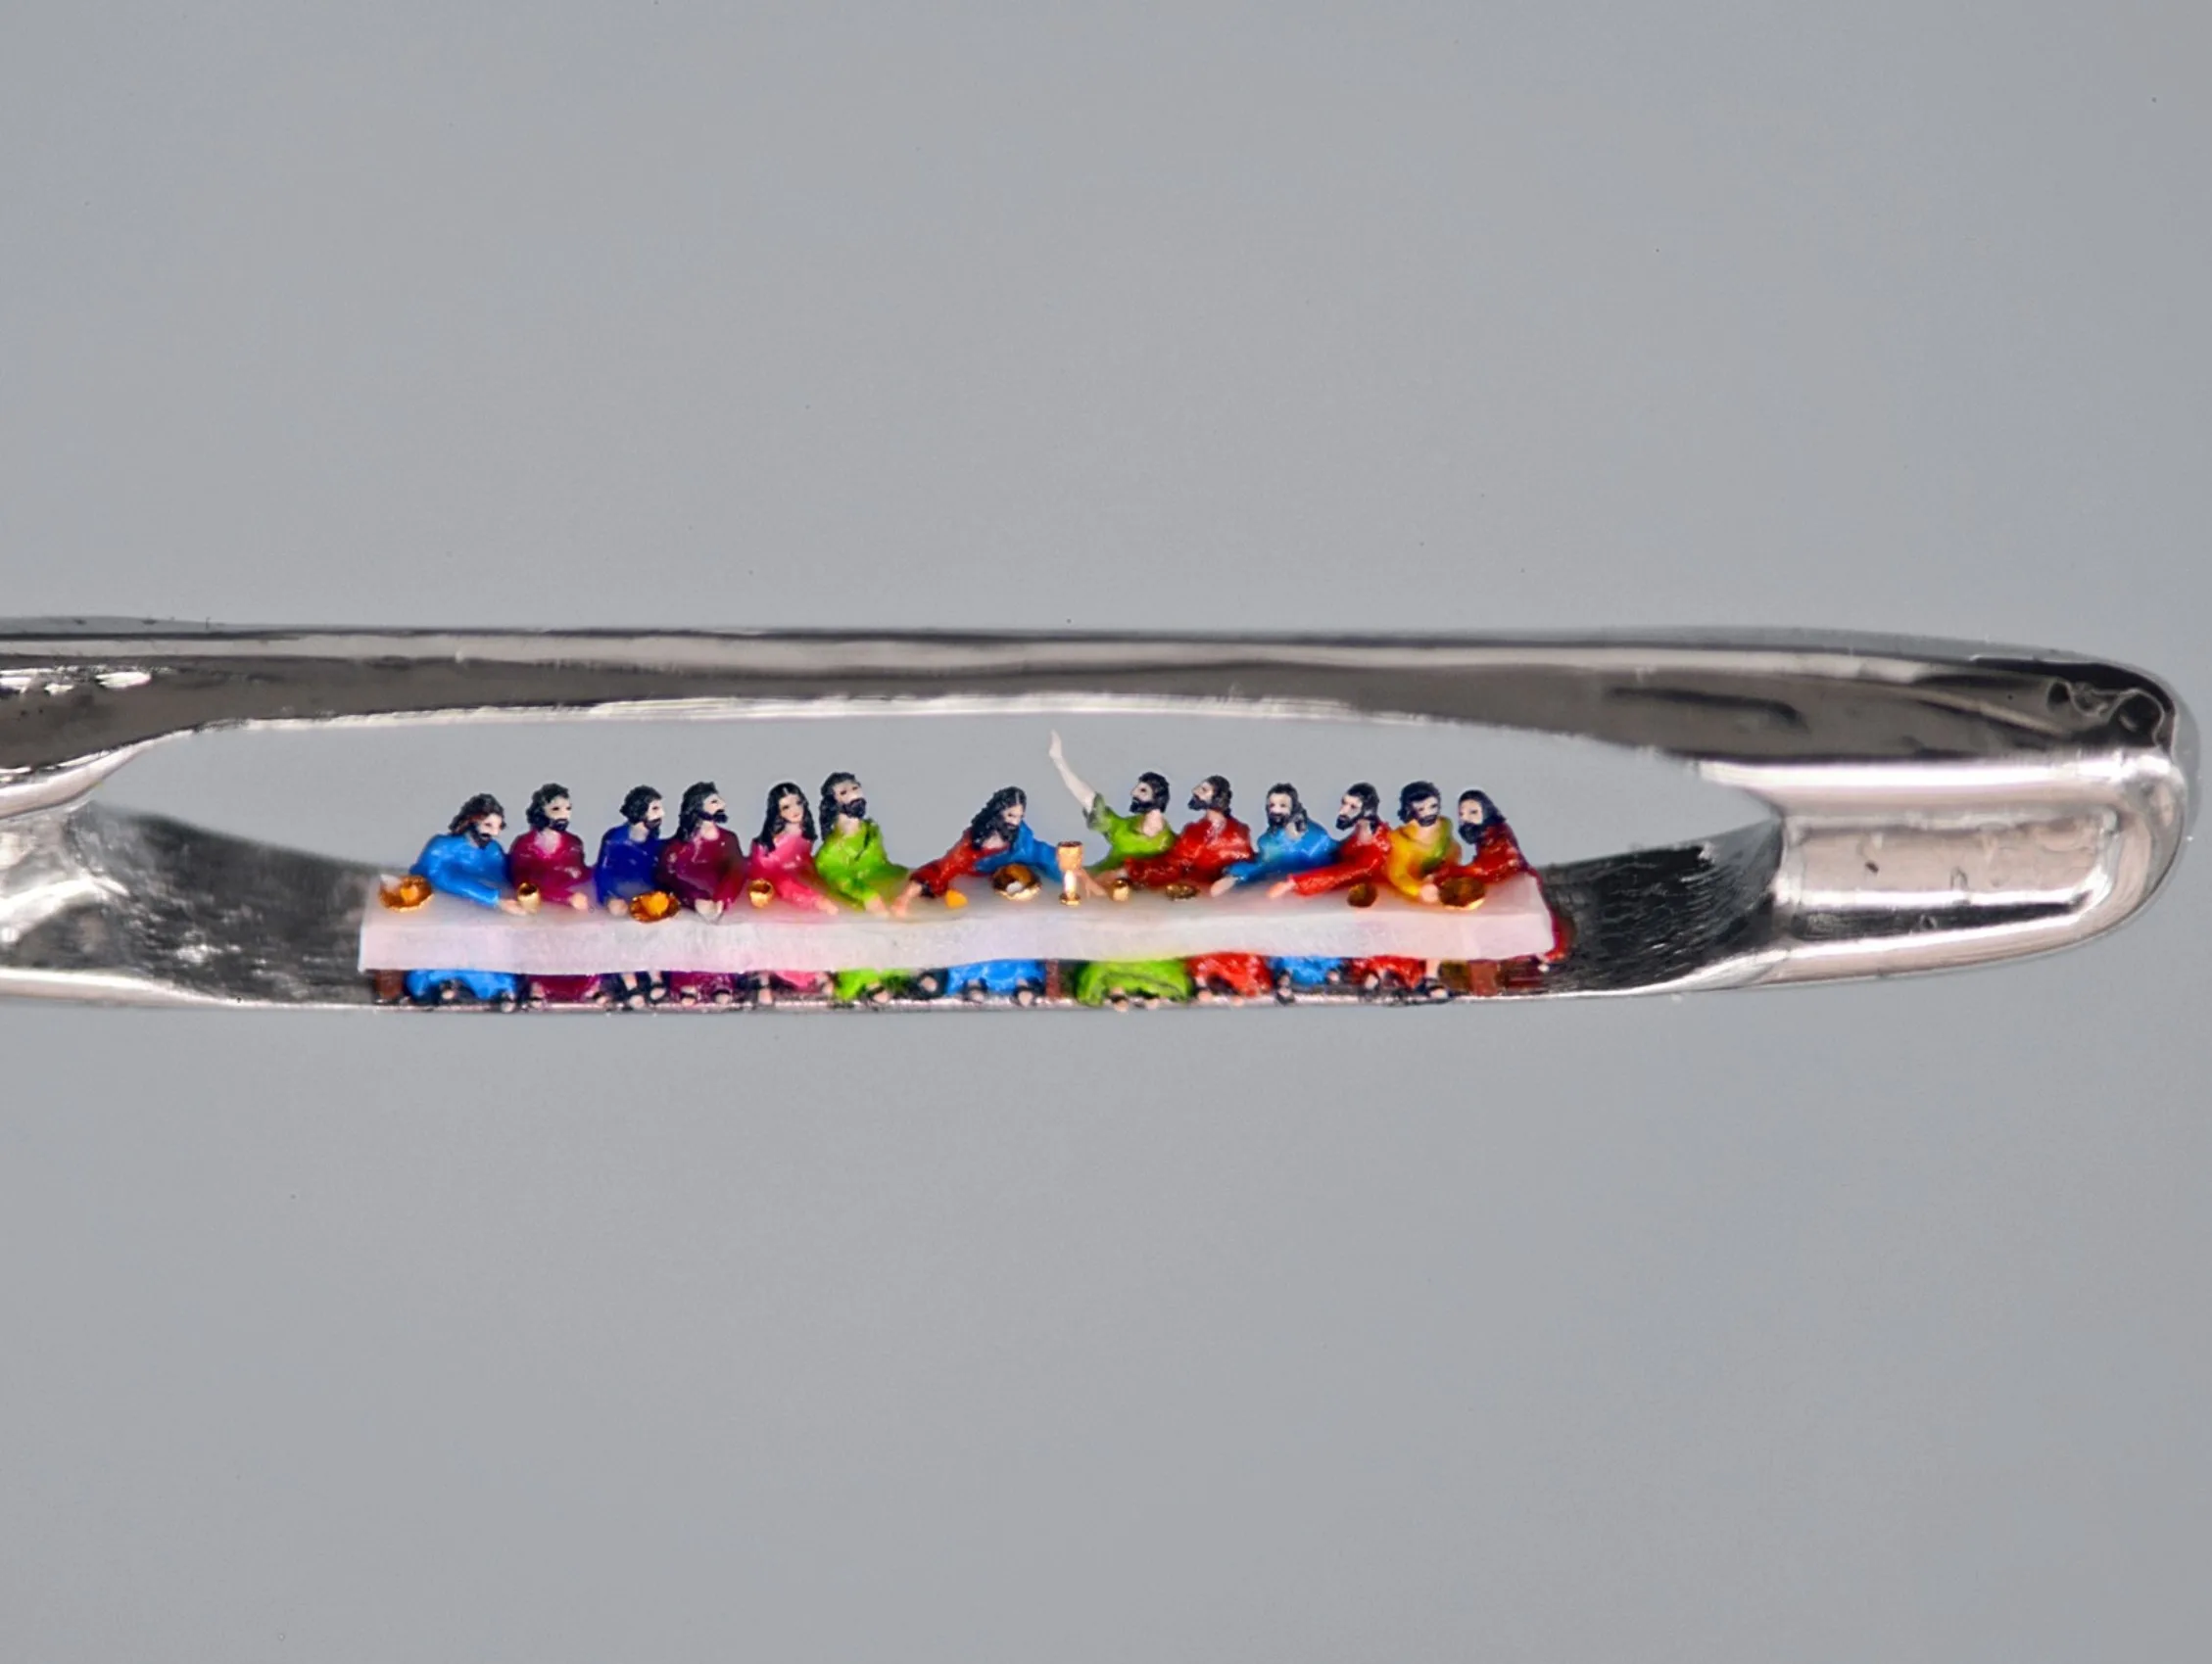 Tiniest "Last Supper" sculpture in the eye of a needle.